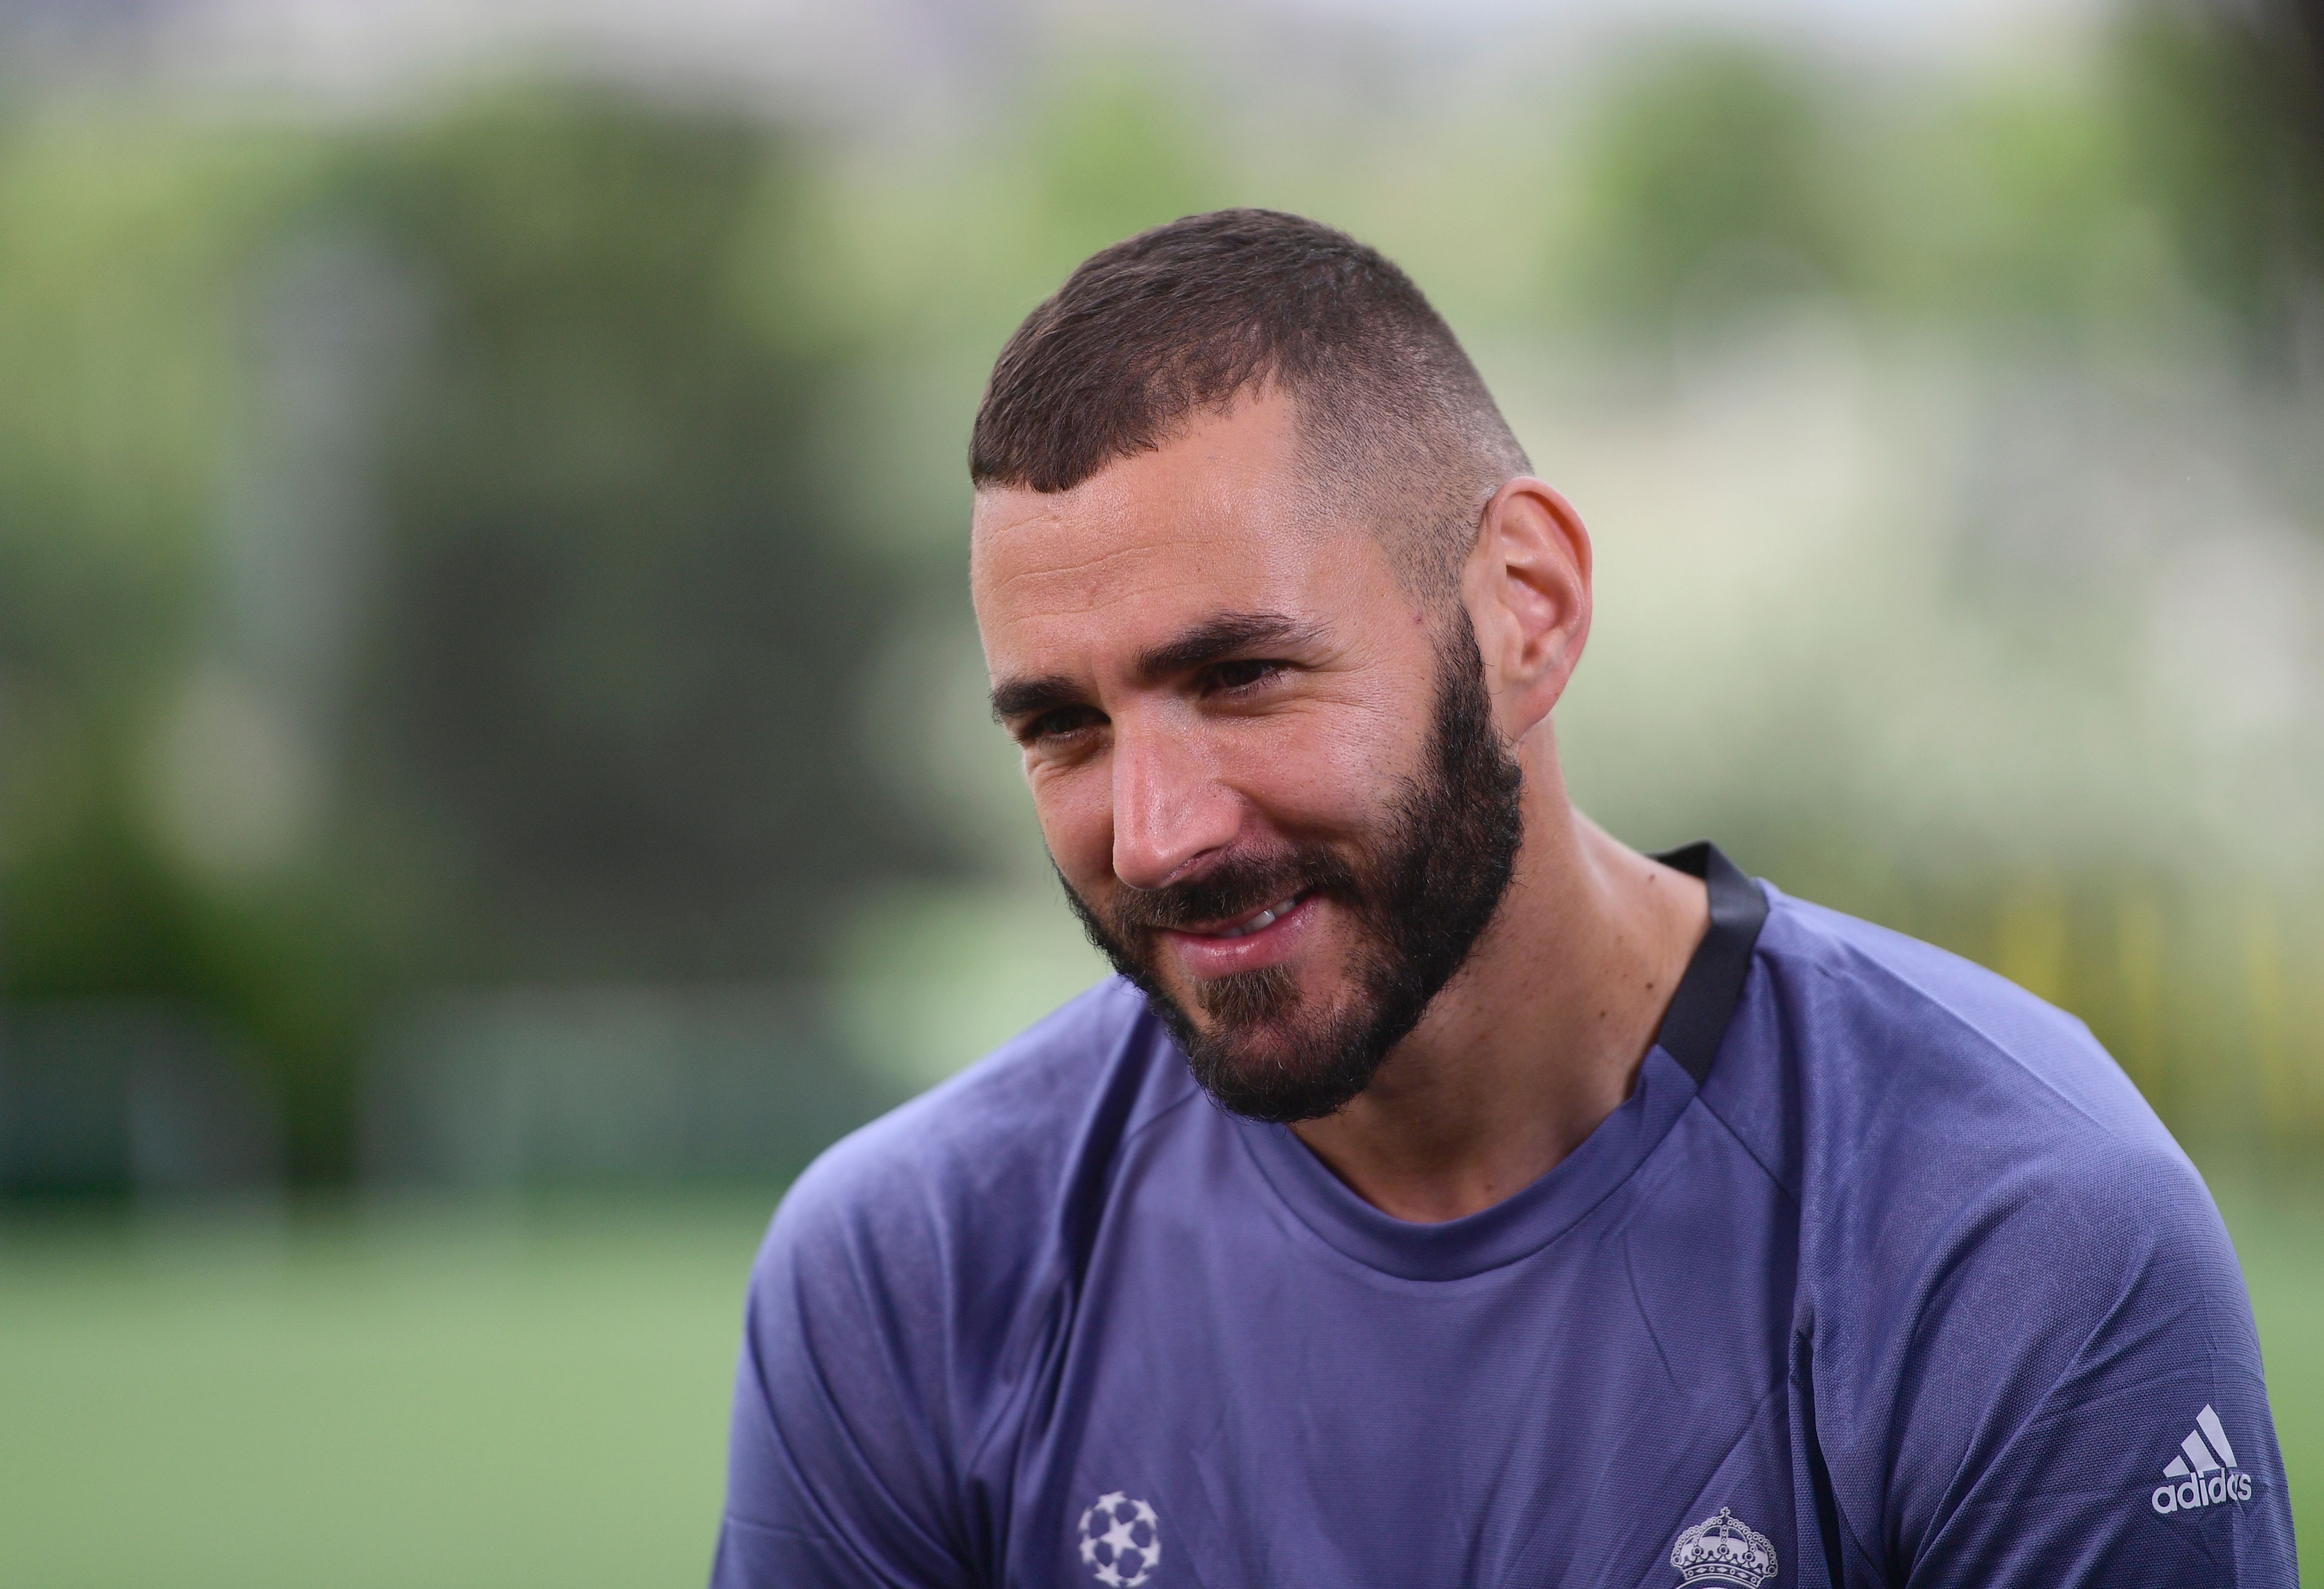 Real Madrid's French forward Karim Benzema attends an interview in the mixed zone at Valdebebas Sport City in Madrid on May 30, 2017 at the Media Day event prior to the UEFA Champions League football match final Juventus vs Real Madrid. / AFP PHOTO / PIERRE-PHILIPPE MARCOU        (Photo credit should read PIERRE-PHILIPPE MARCOU/AFP/Getty Images)